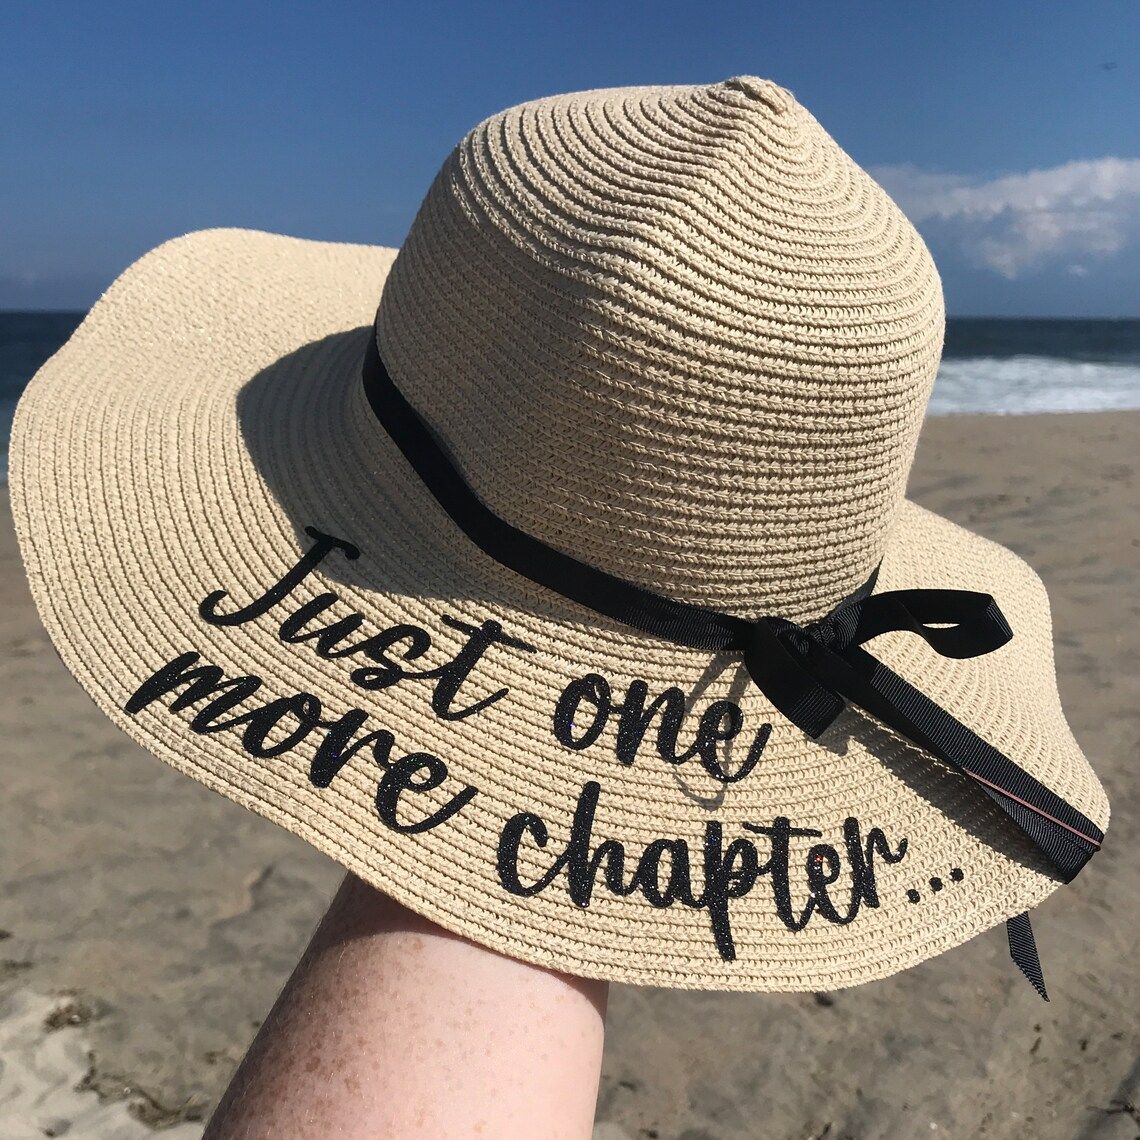 a sun hat that says "just one more chapter" on the brim